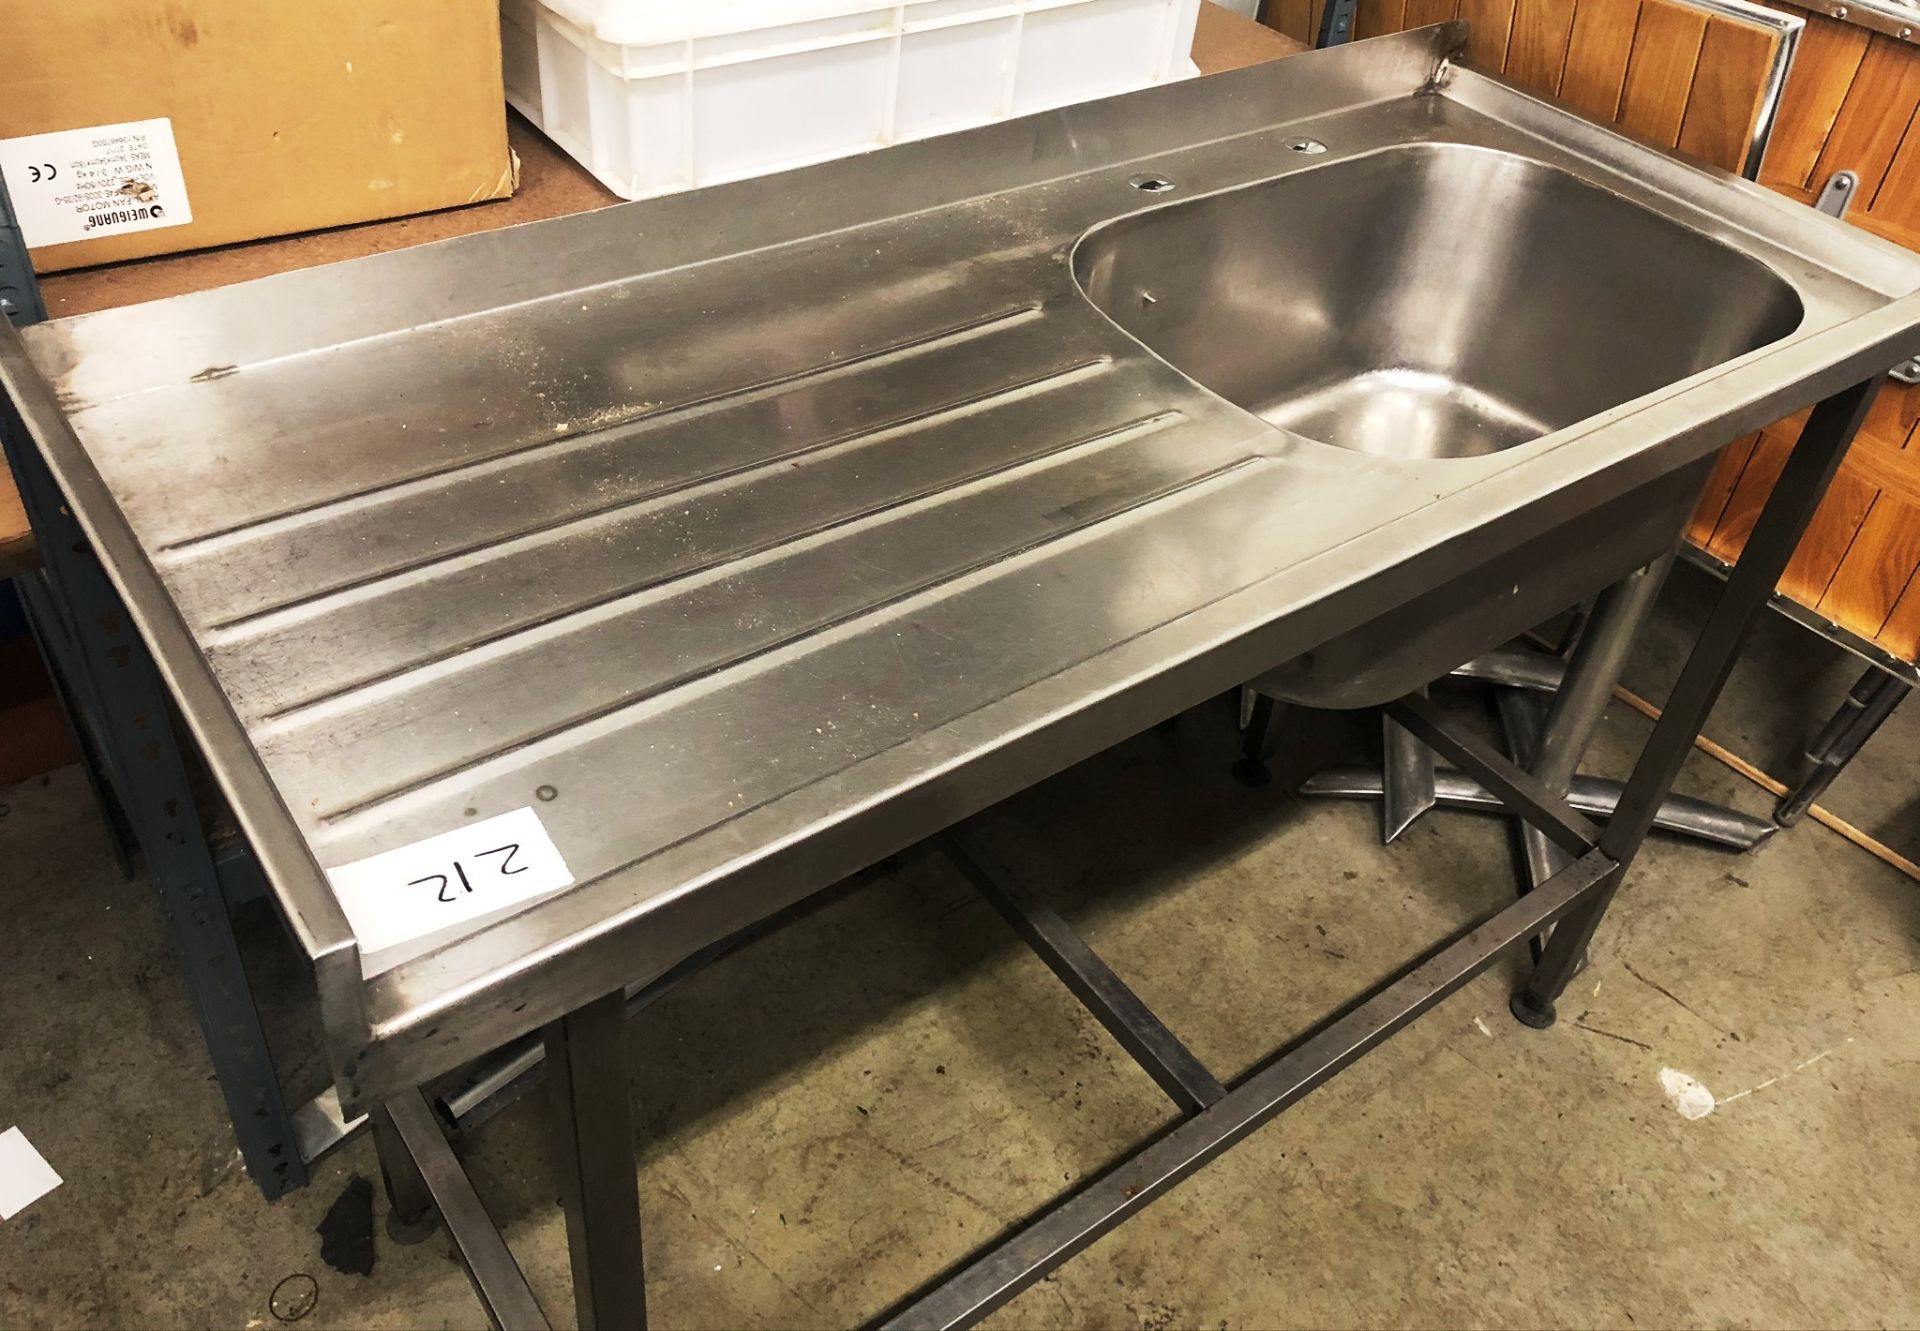 Stainless Steel Bowl Sink Unit w/ Drainer & Upstand | 128cm x 52cm x 97cm - Image 4 of 5